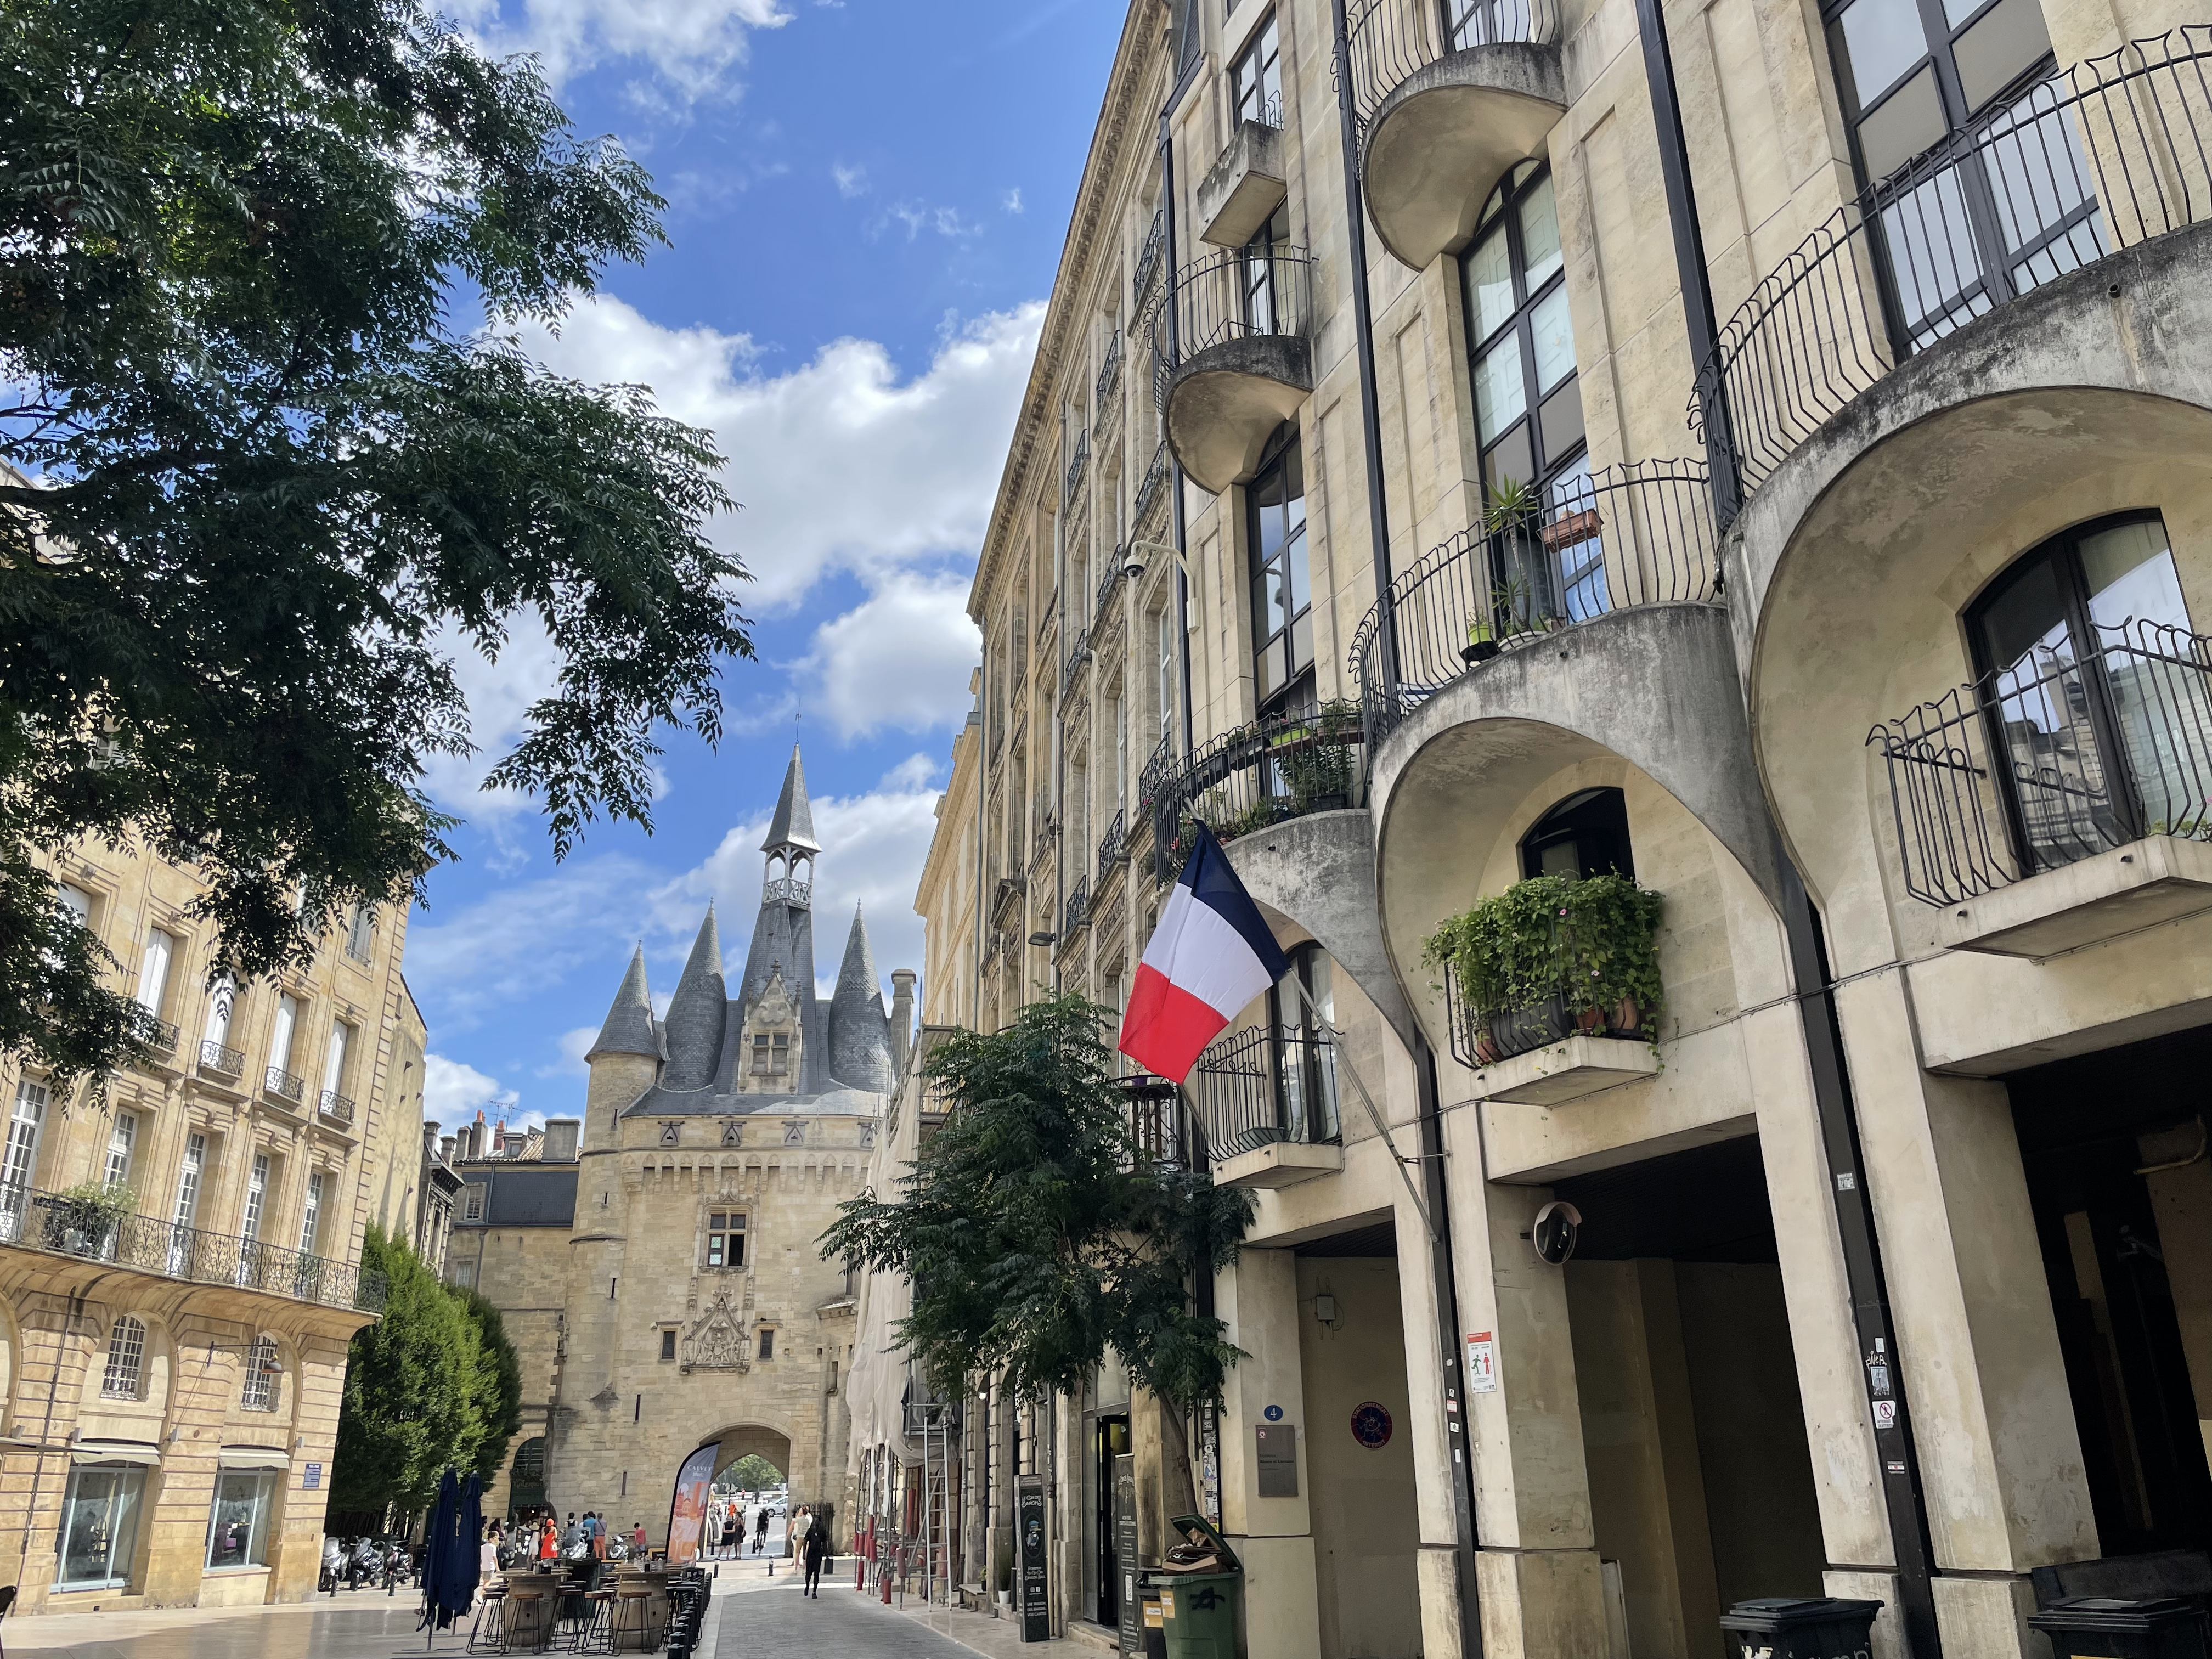 street with French flag behind Porte Cailhau, a castle-like gate in Bordeaux